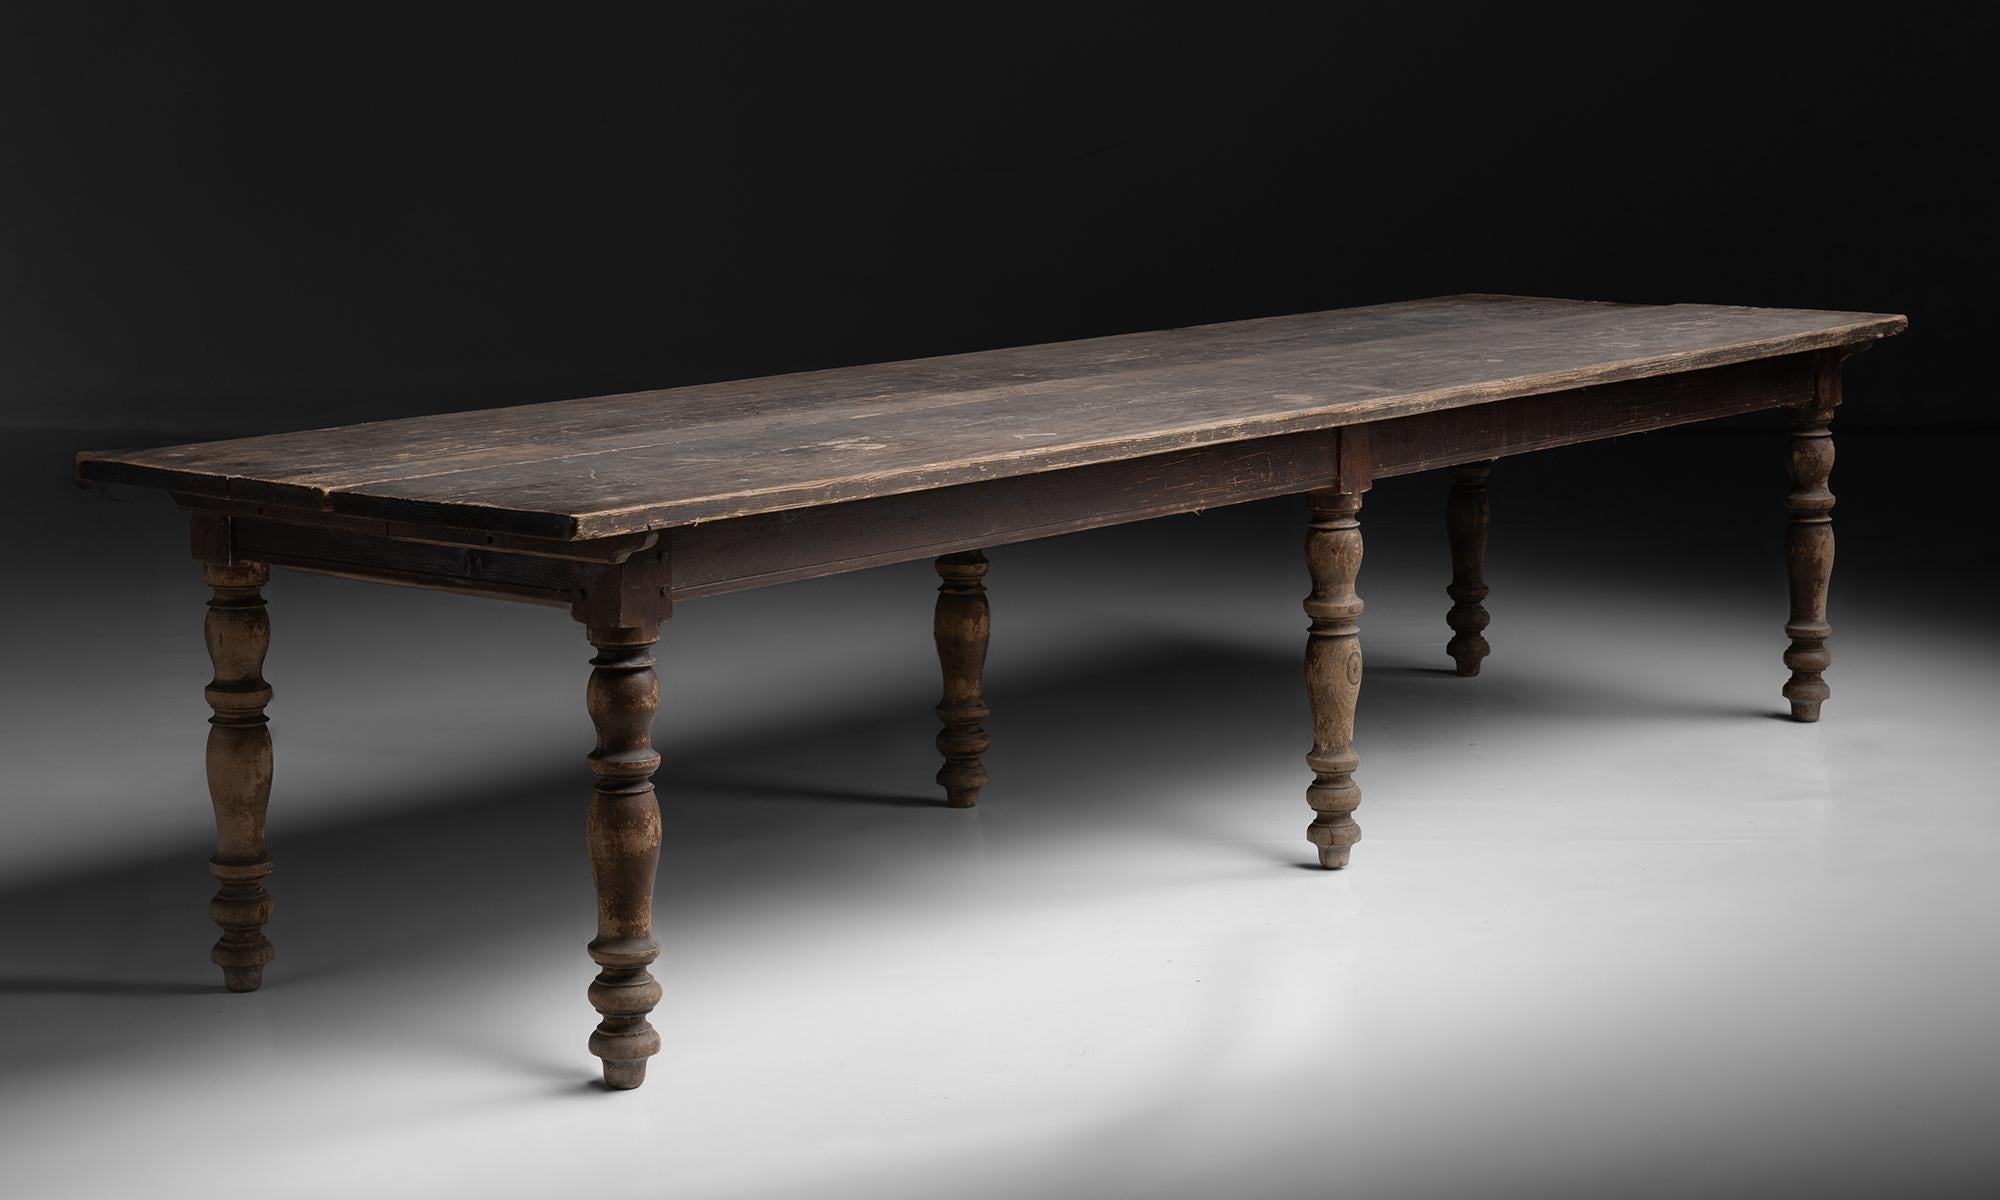 Pine Refectory Table

England circa 1890

Turned leg dining table with plank top. Original stain.

134.25”L x 38.75”d x 29.75”h